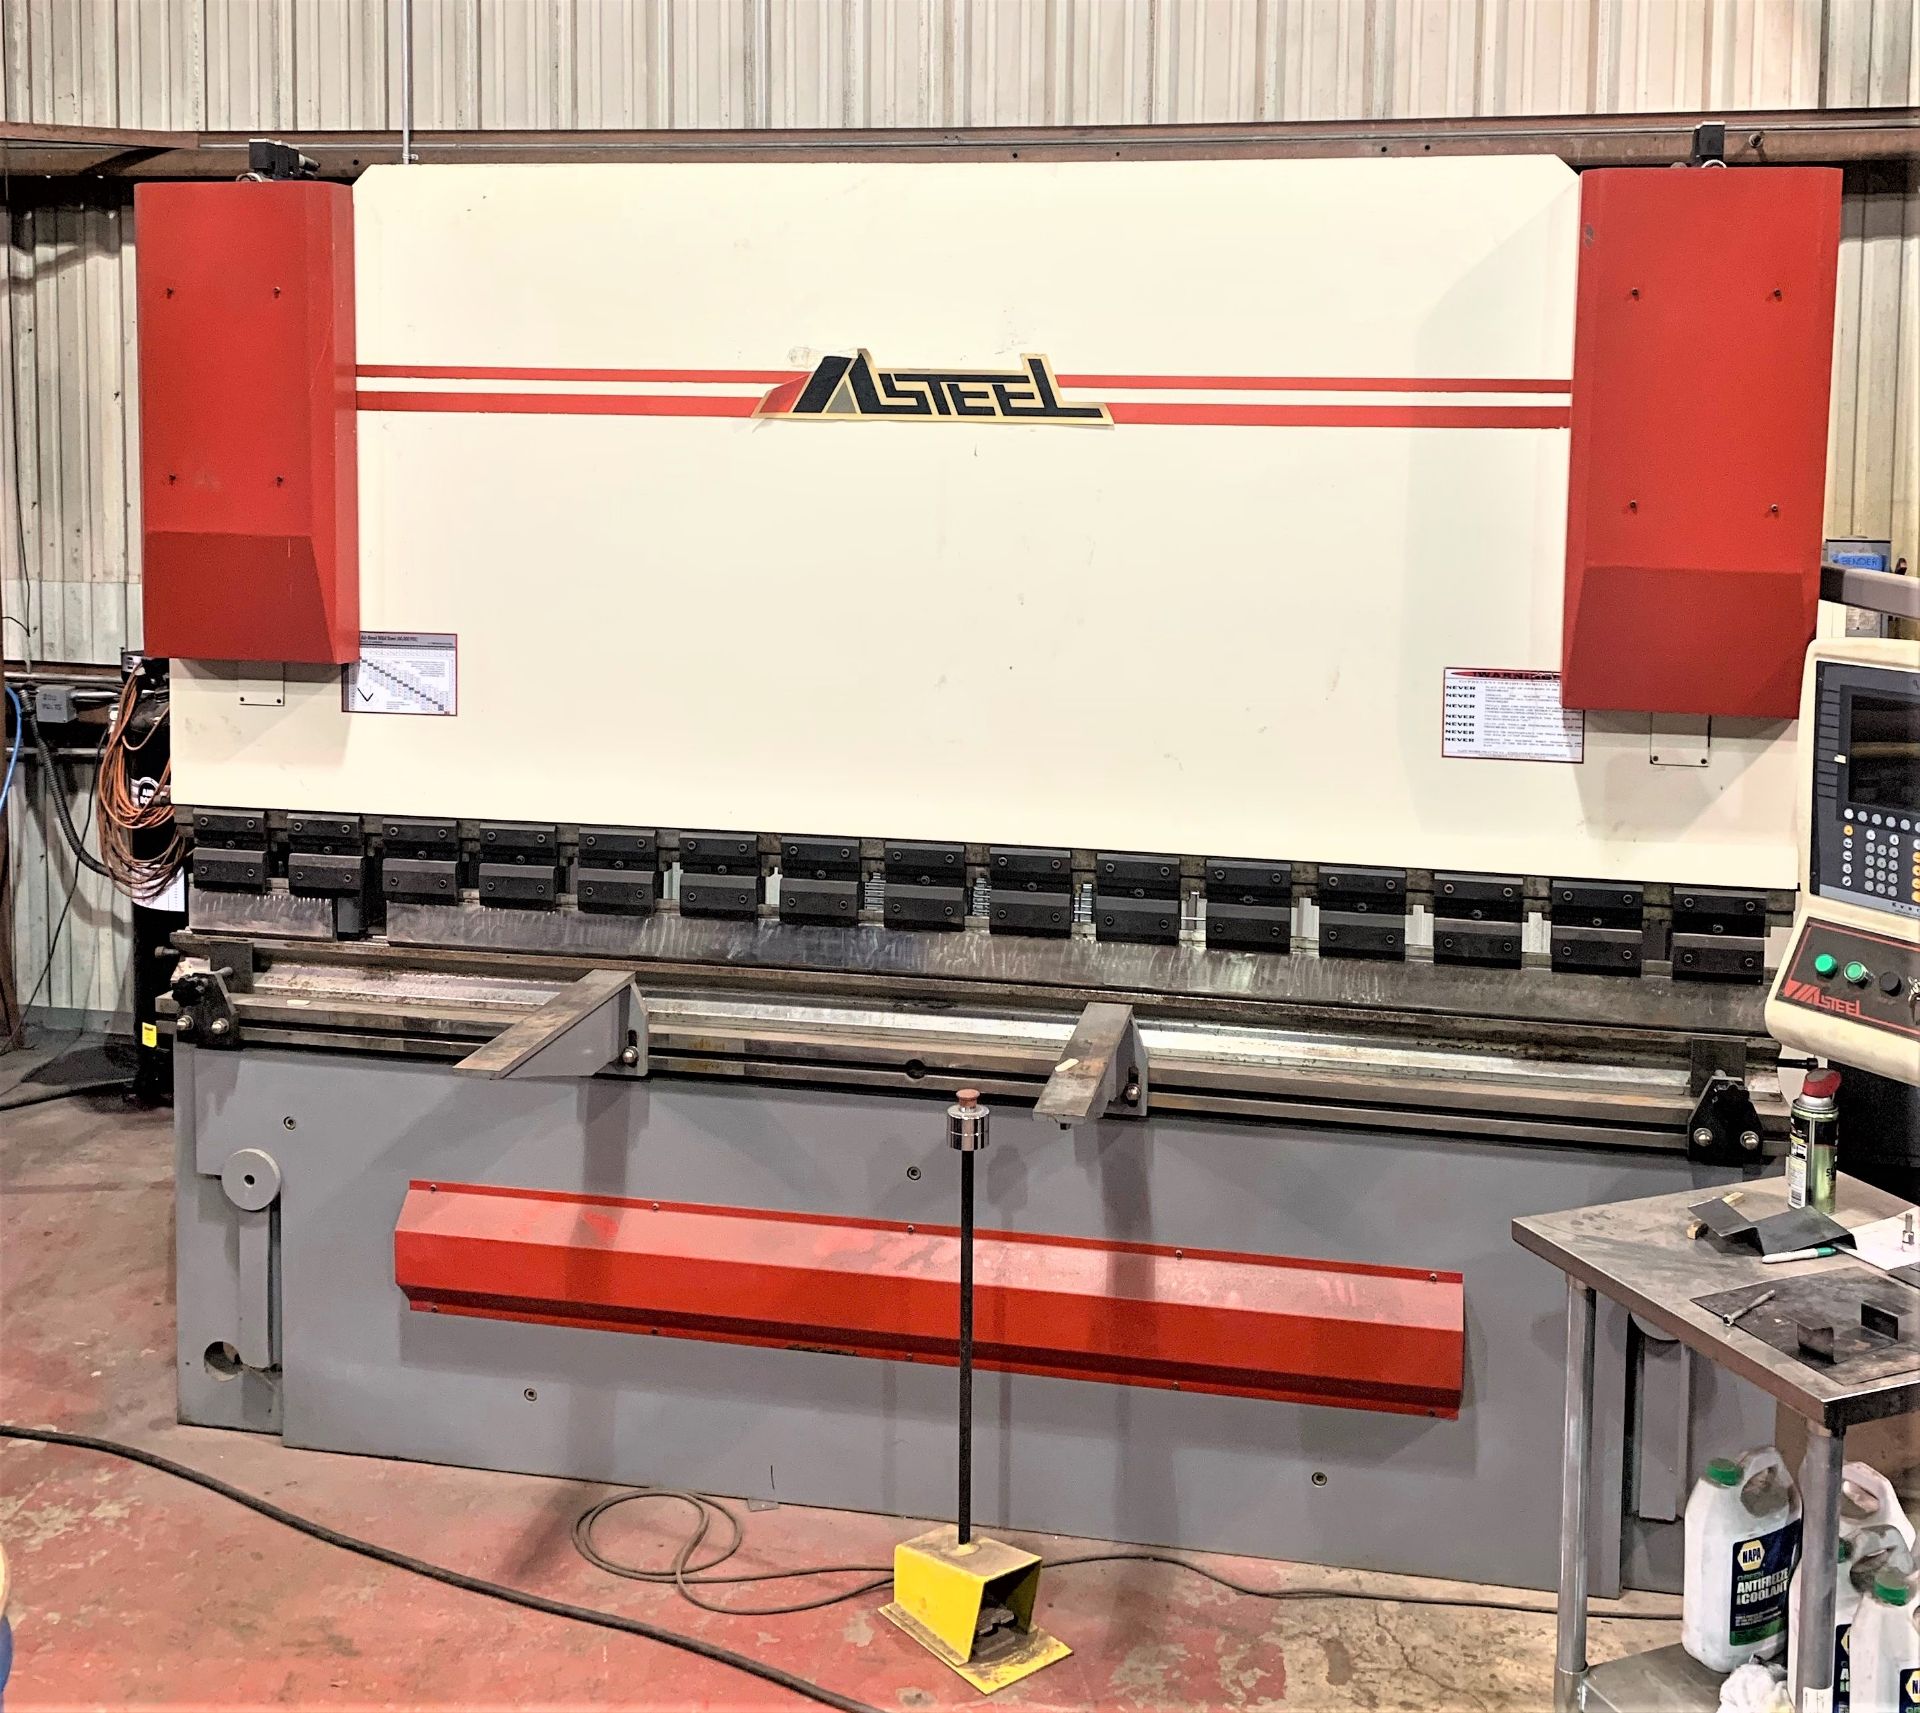 190 Ton Masteel CNC 4-Axis CNC Brake Press with Crowning, S/N 0909001, New 2010